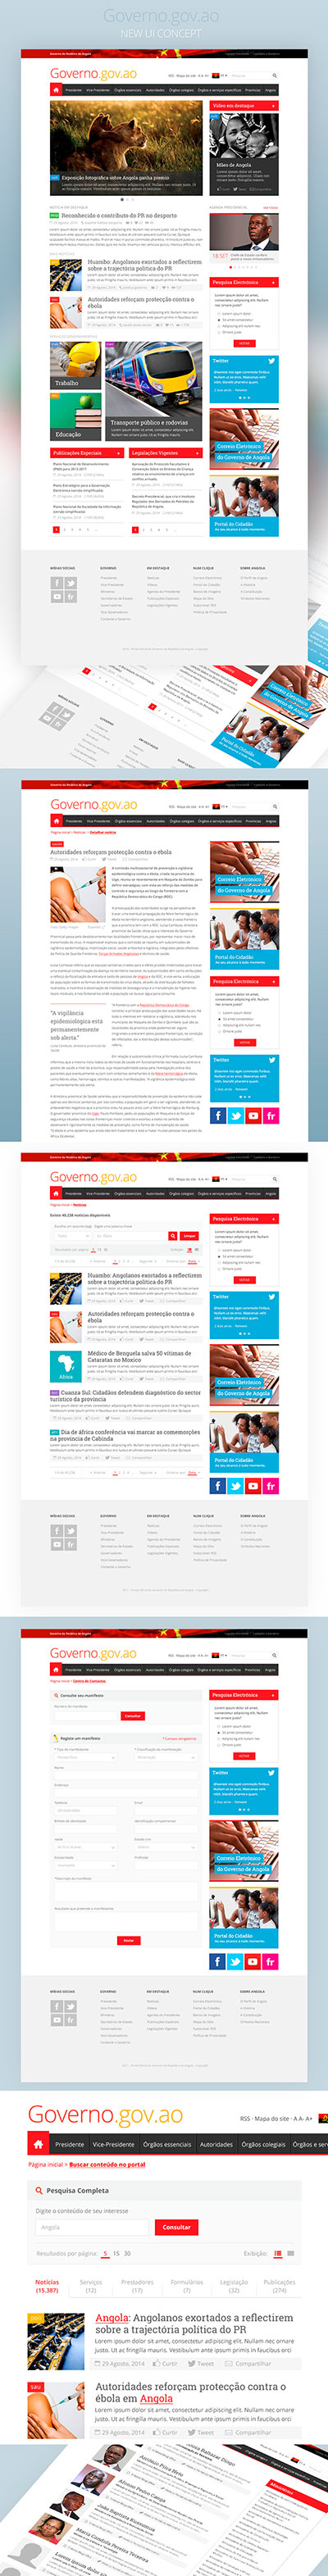 Official website of the Republic of Angola government by Alvaro Rosa on ...